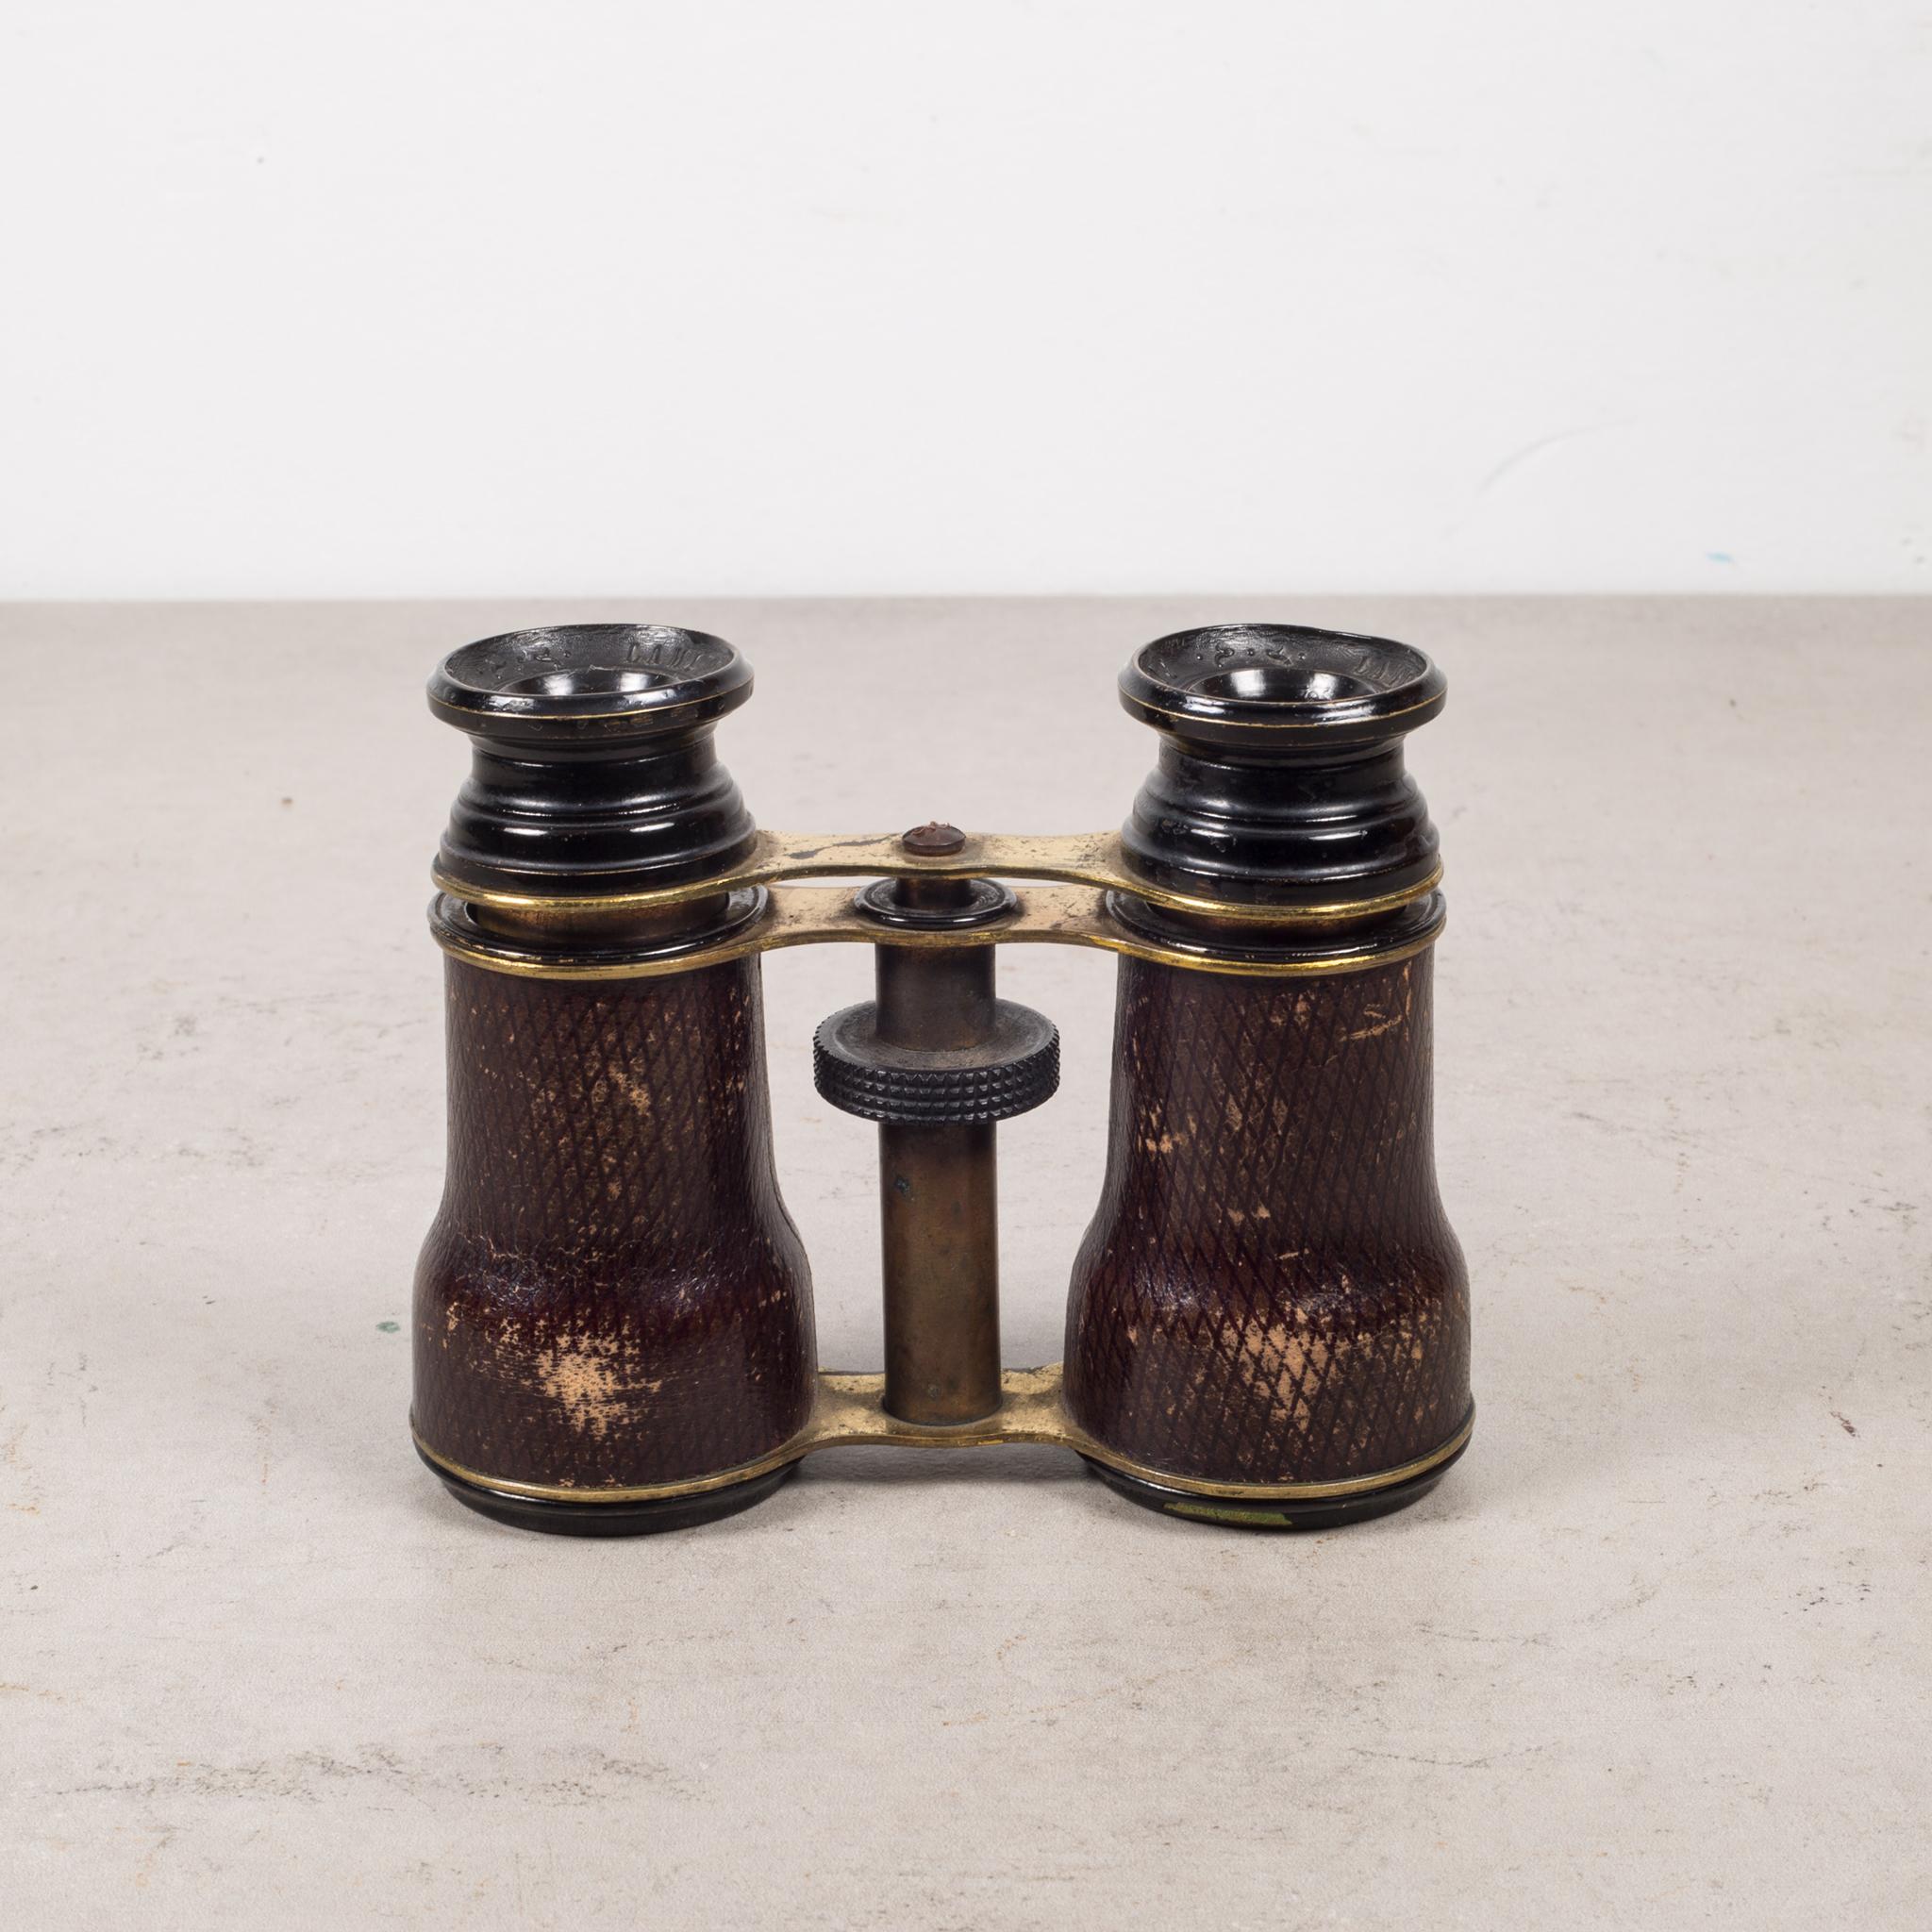 Metal French Leather/Brass Opera Glasses by Le Maire Fabt, Paris, circa 1880